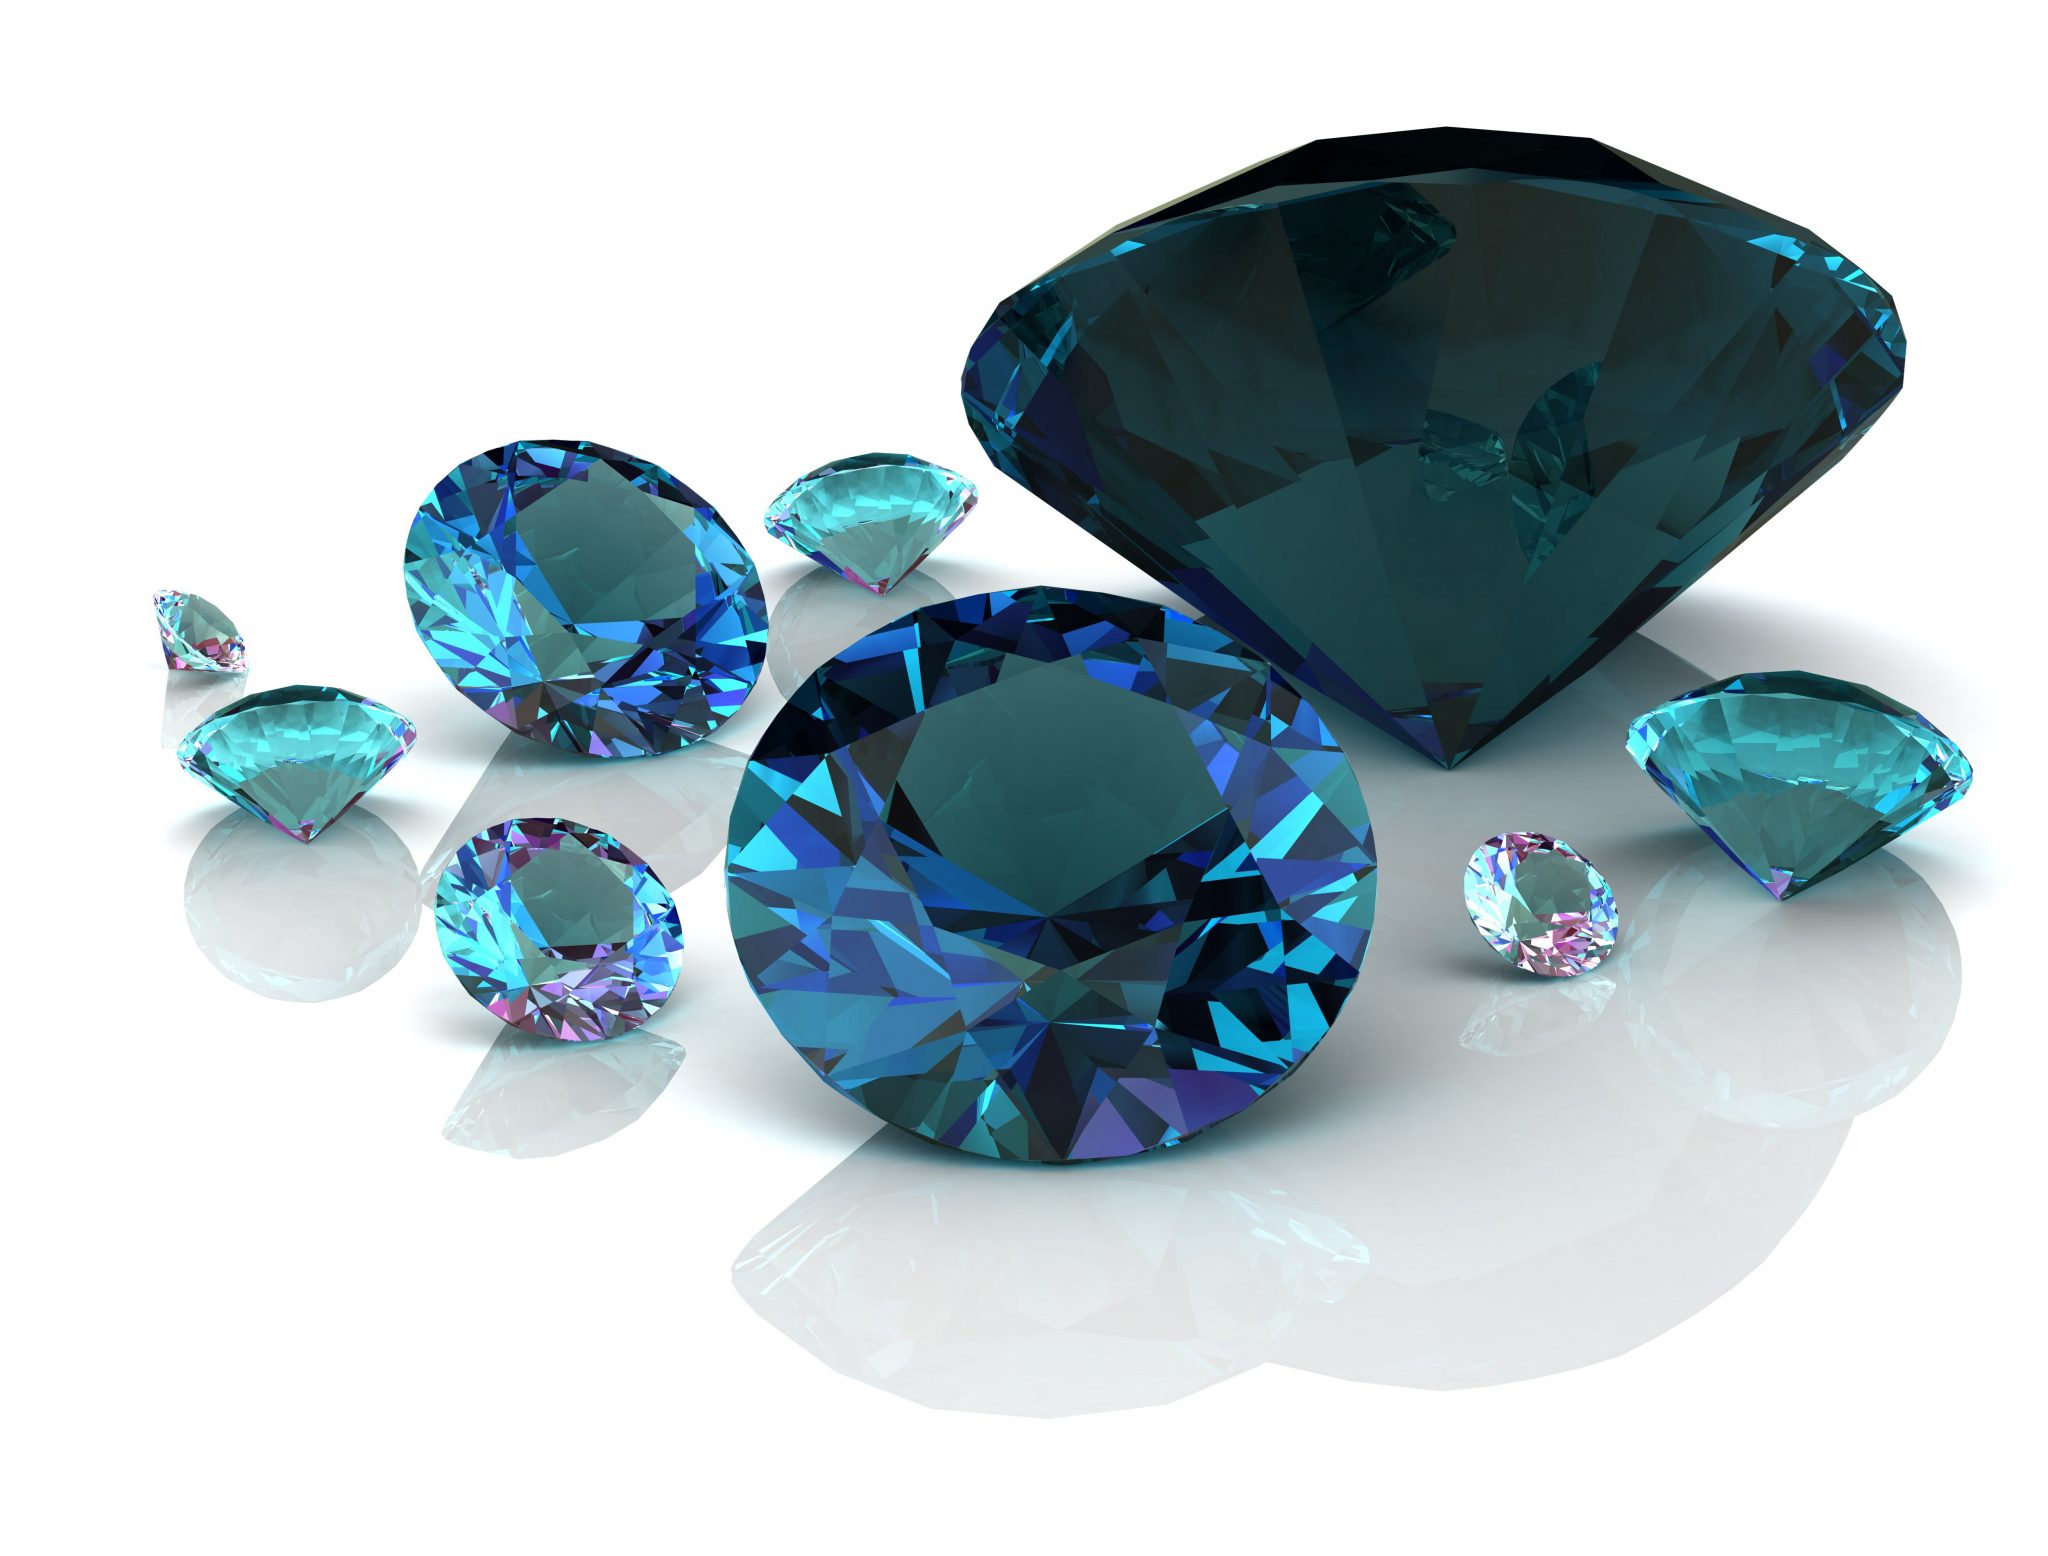 alexandrite-meanings-properties-history-of-the-rare-june-birthstone